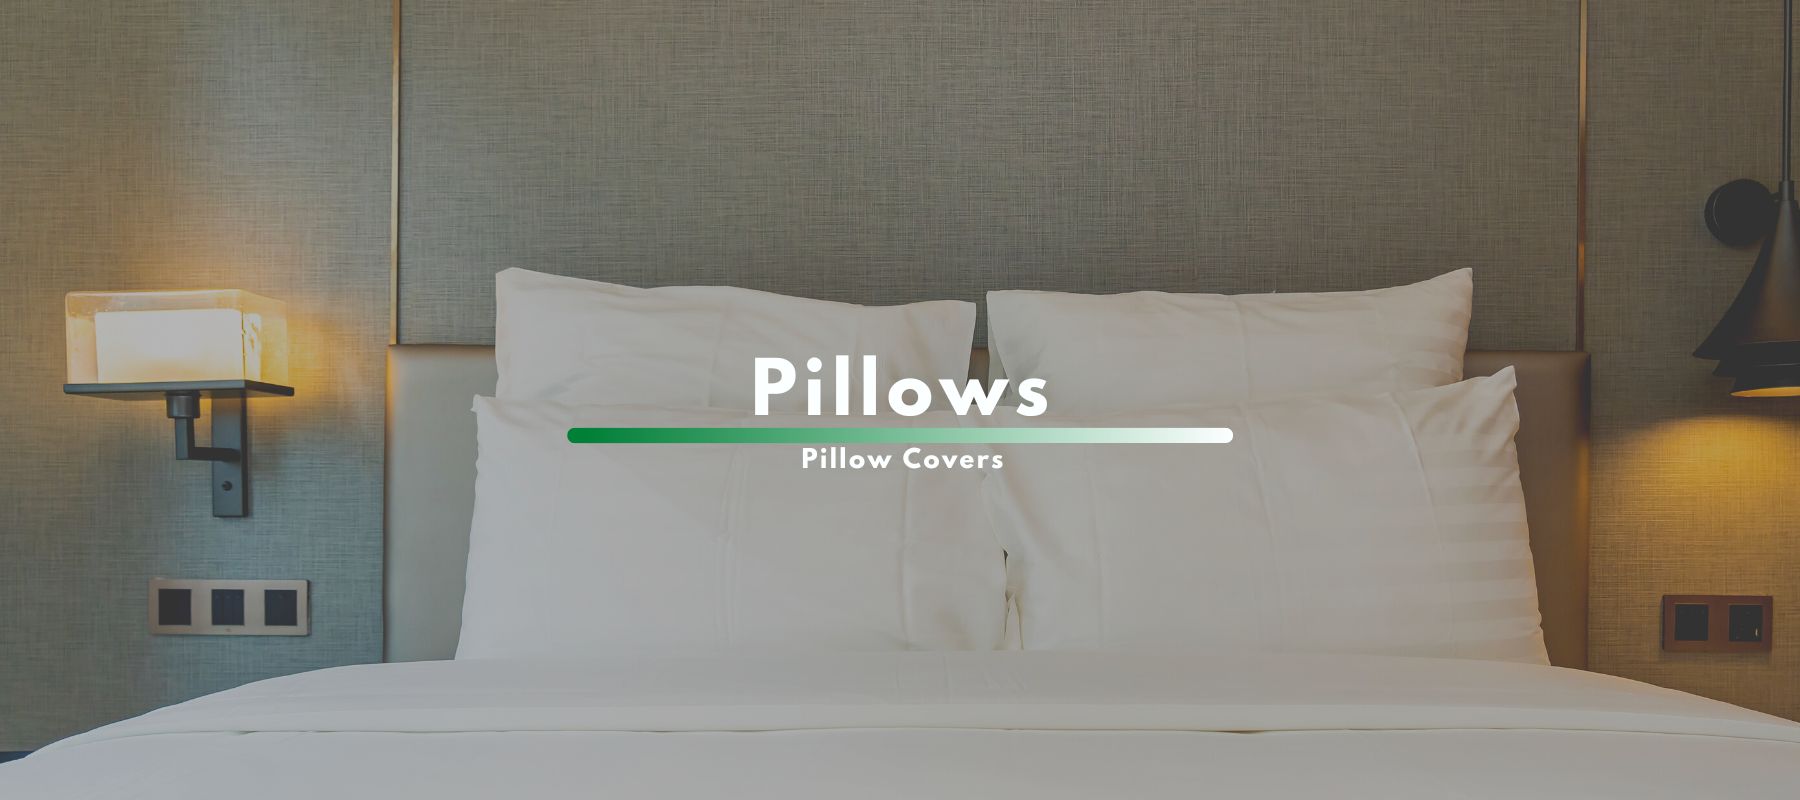 Pillows and Pillow Covers - All